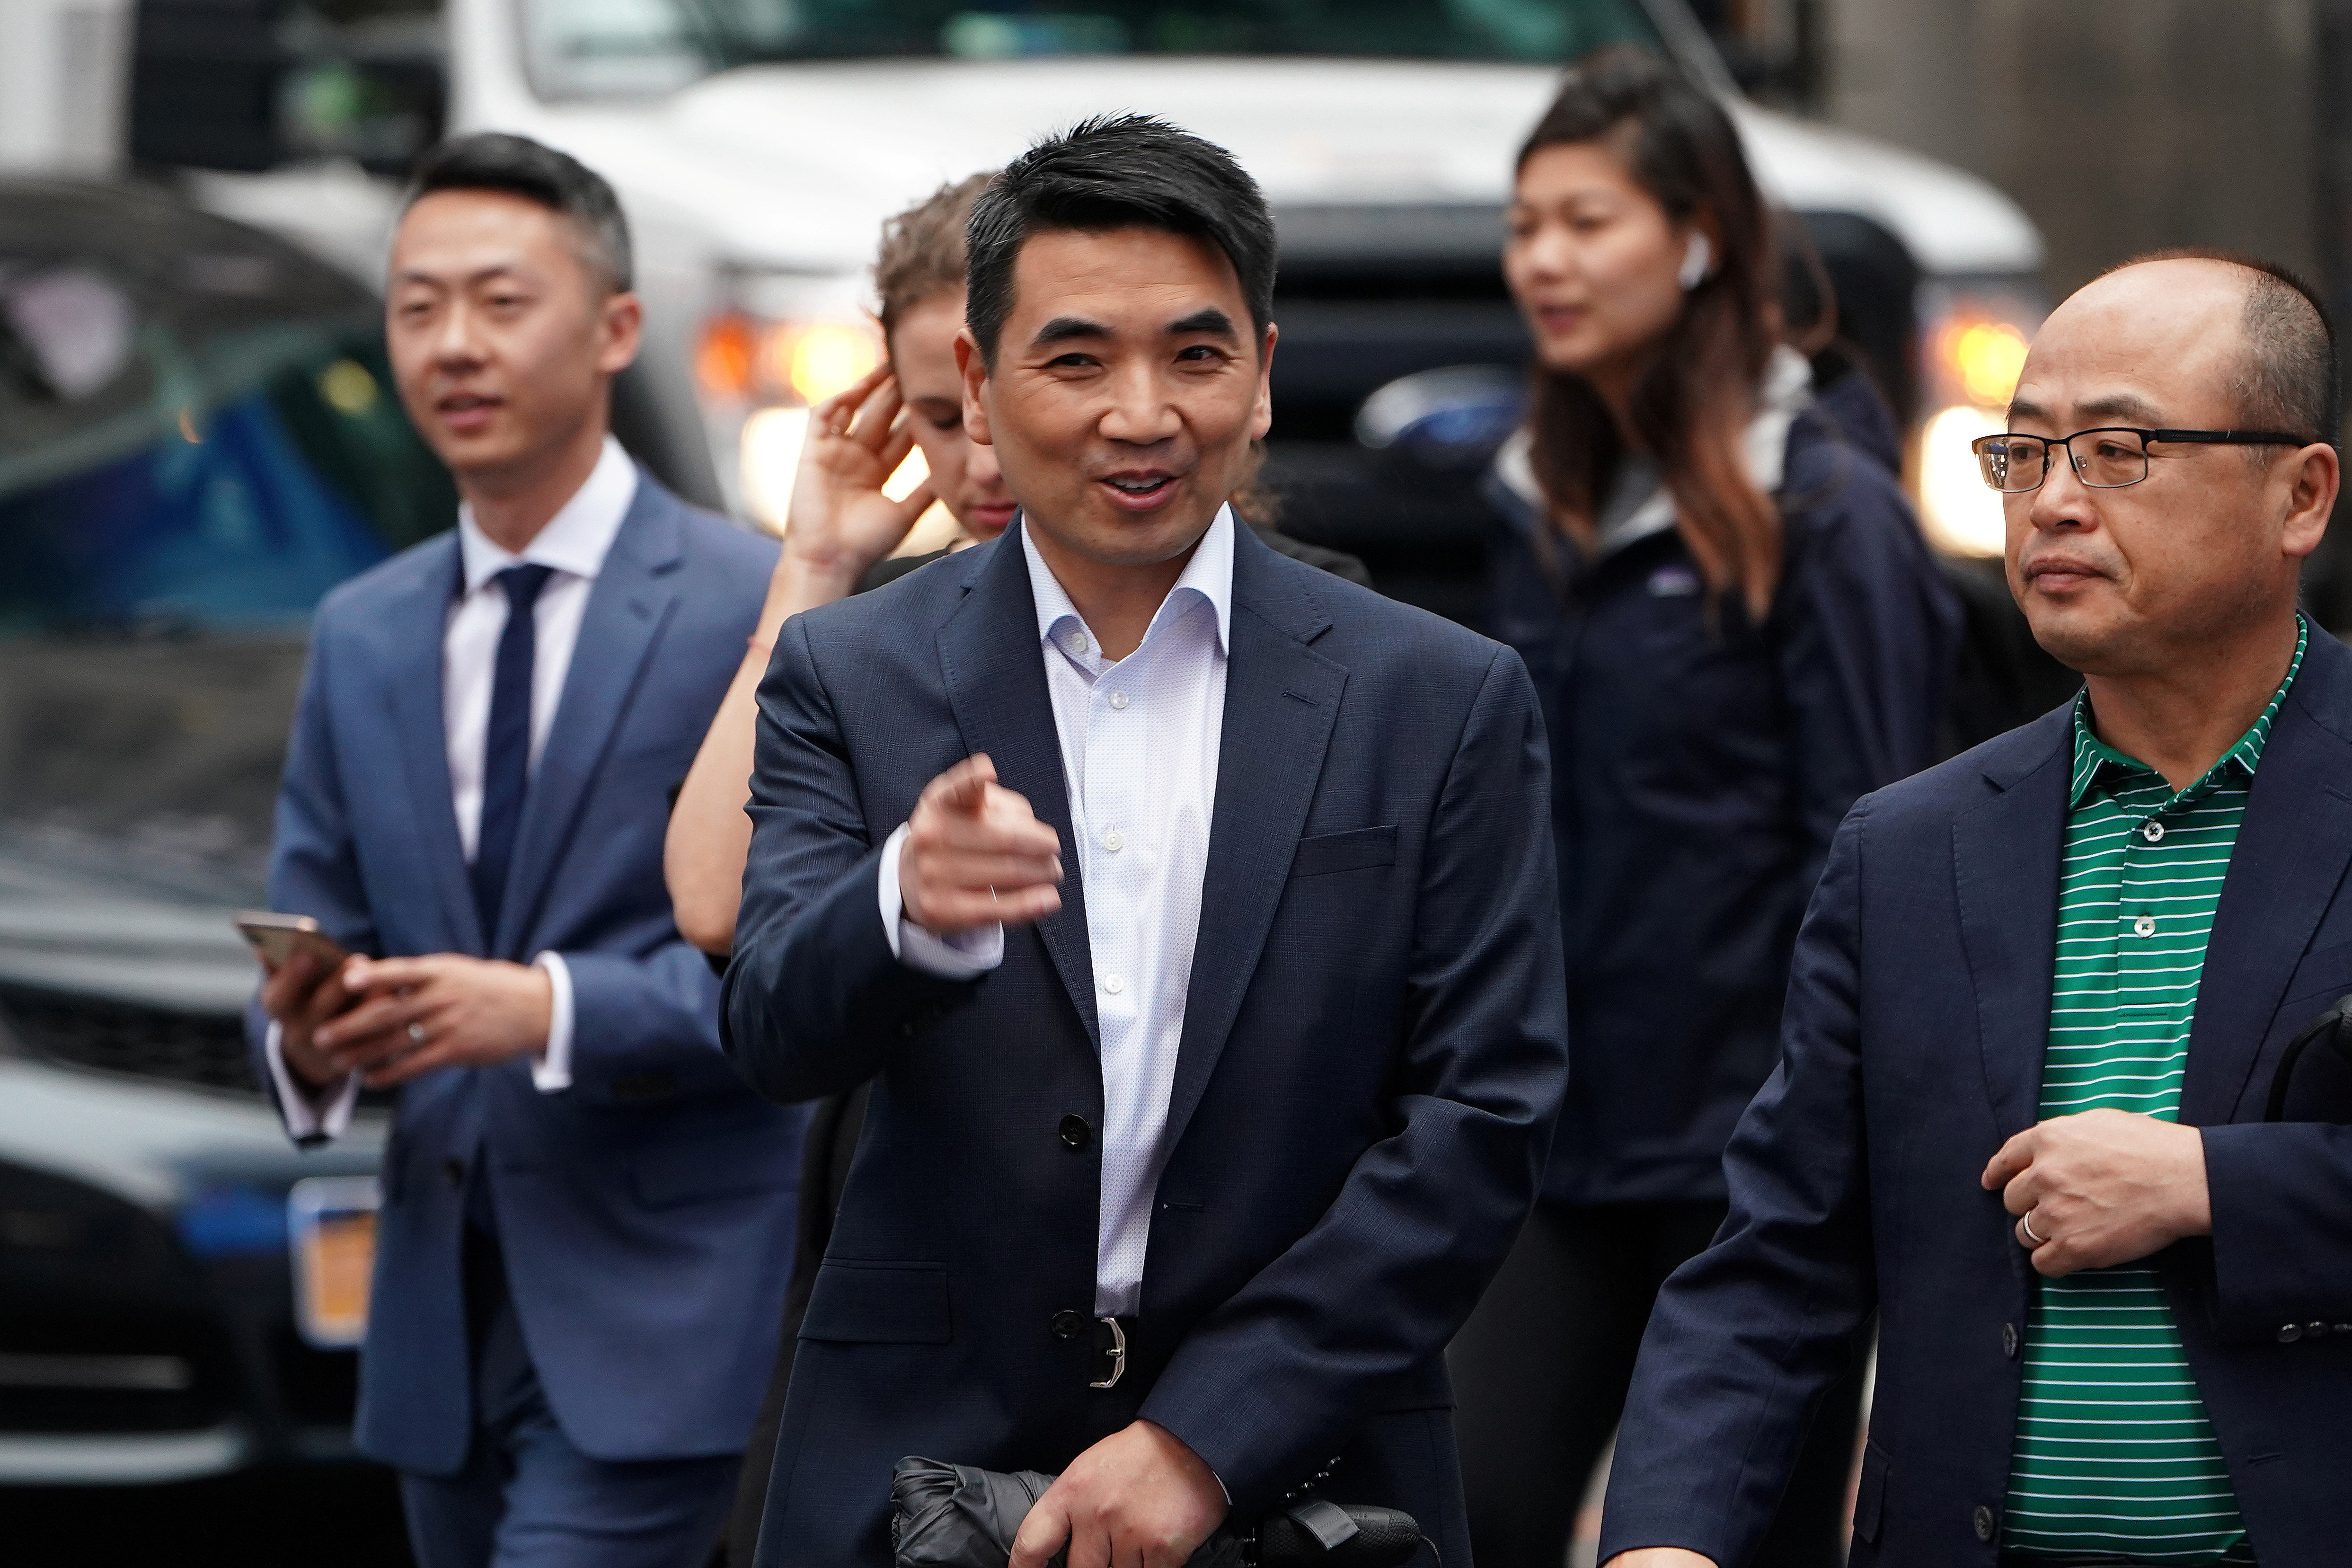 Eric Yuan, CEO of Zoom Video Communications walks on the street as he takes part in a bell ringing ceremony at the NASDAQ MarketSite in New York